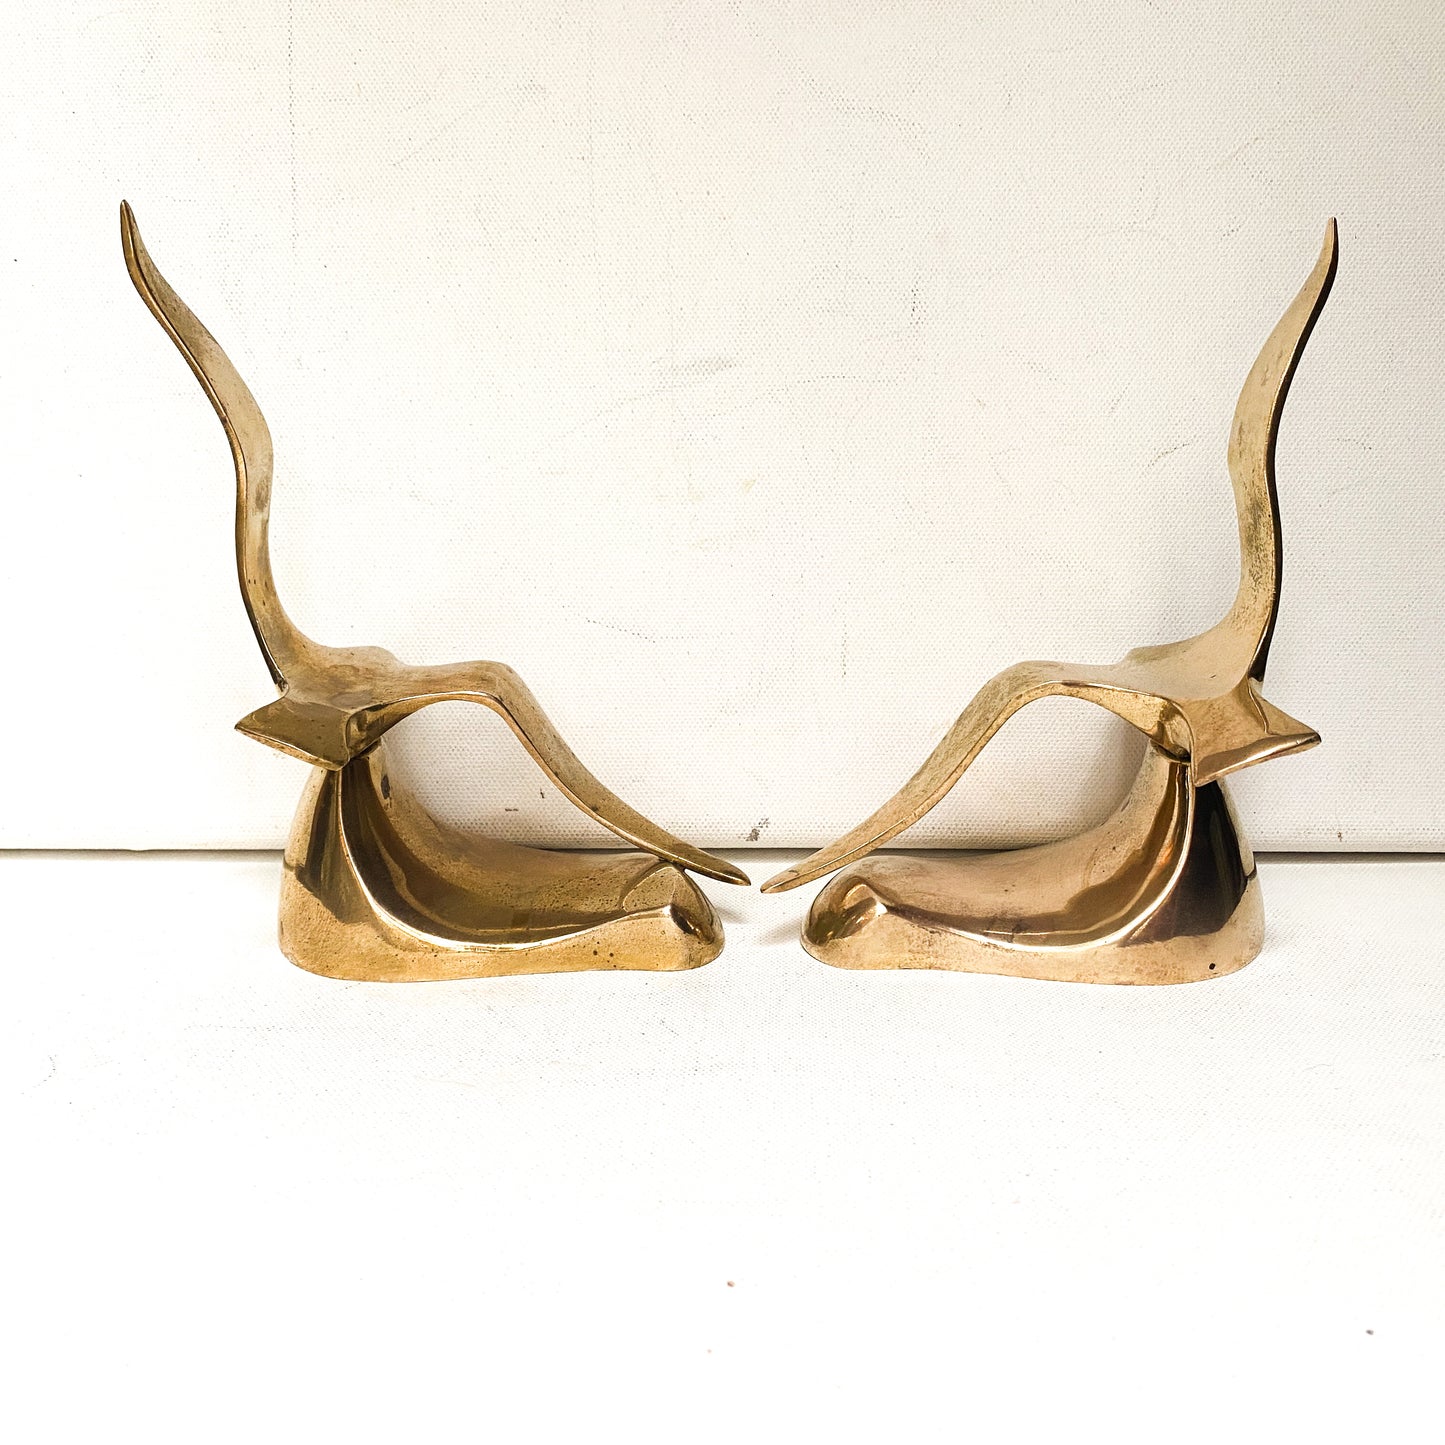 Vintage Brass Seagull Bookends, Midcentury Modern Style